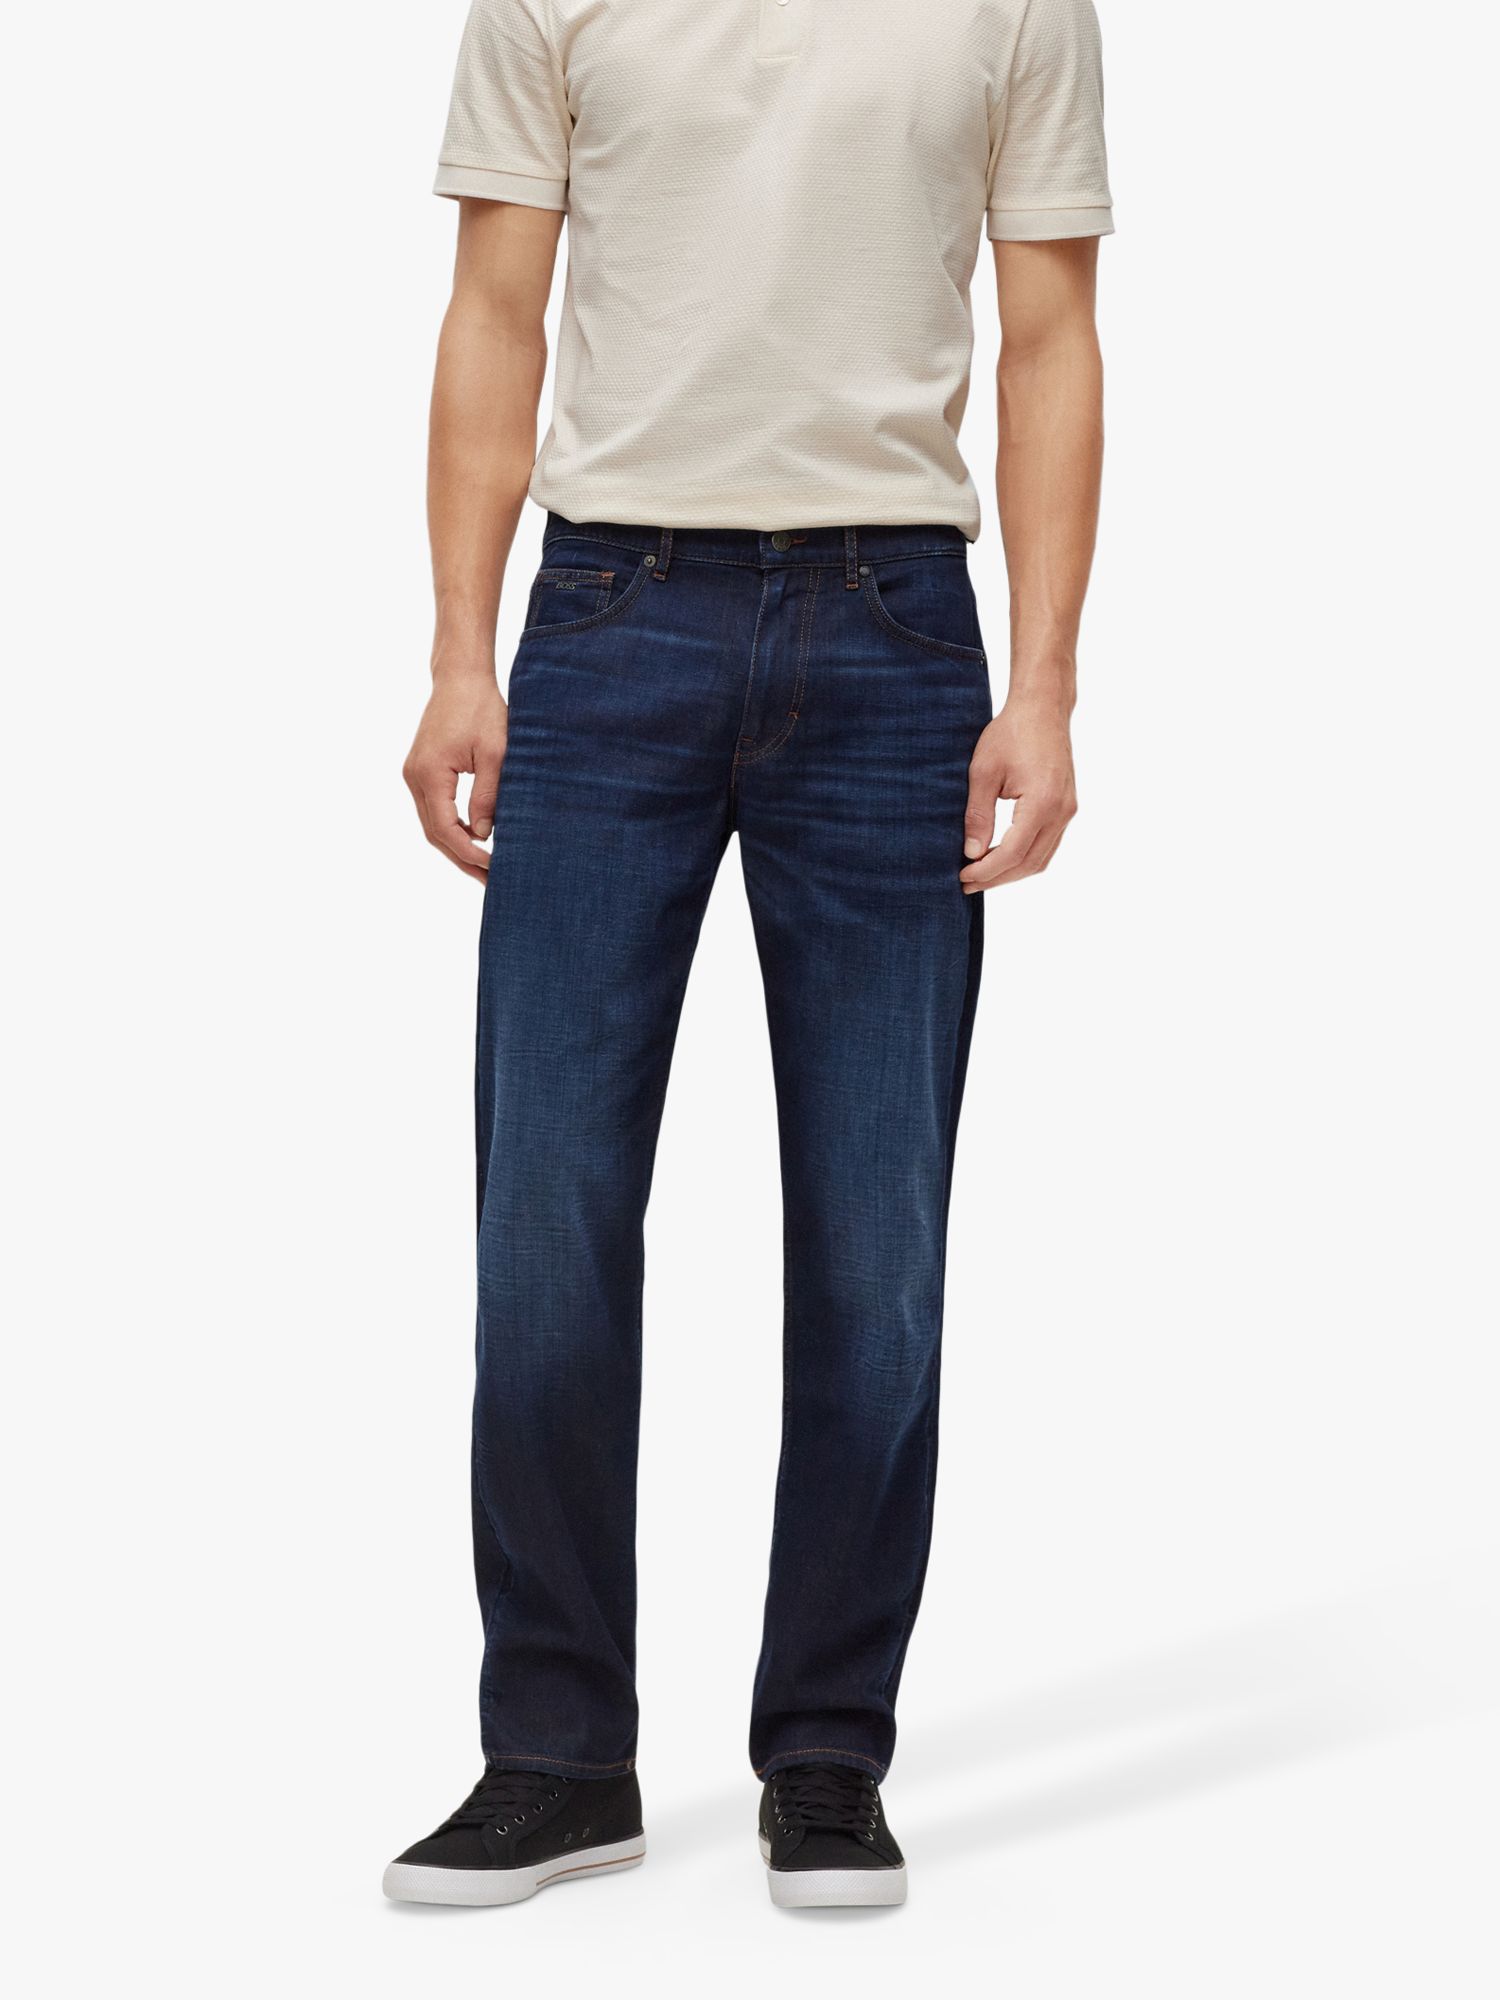 BOSS Anderson Slim Fit Jeans, Navy at John Lewis & Partners